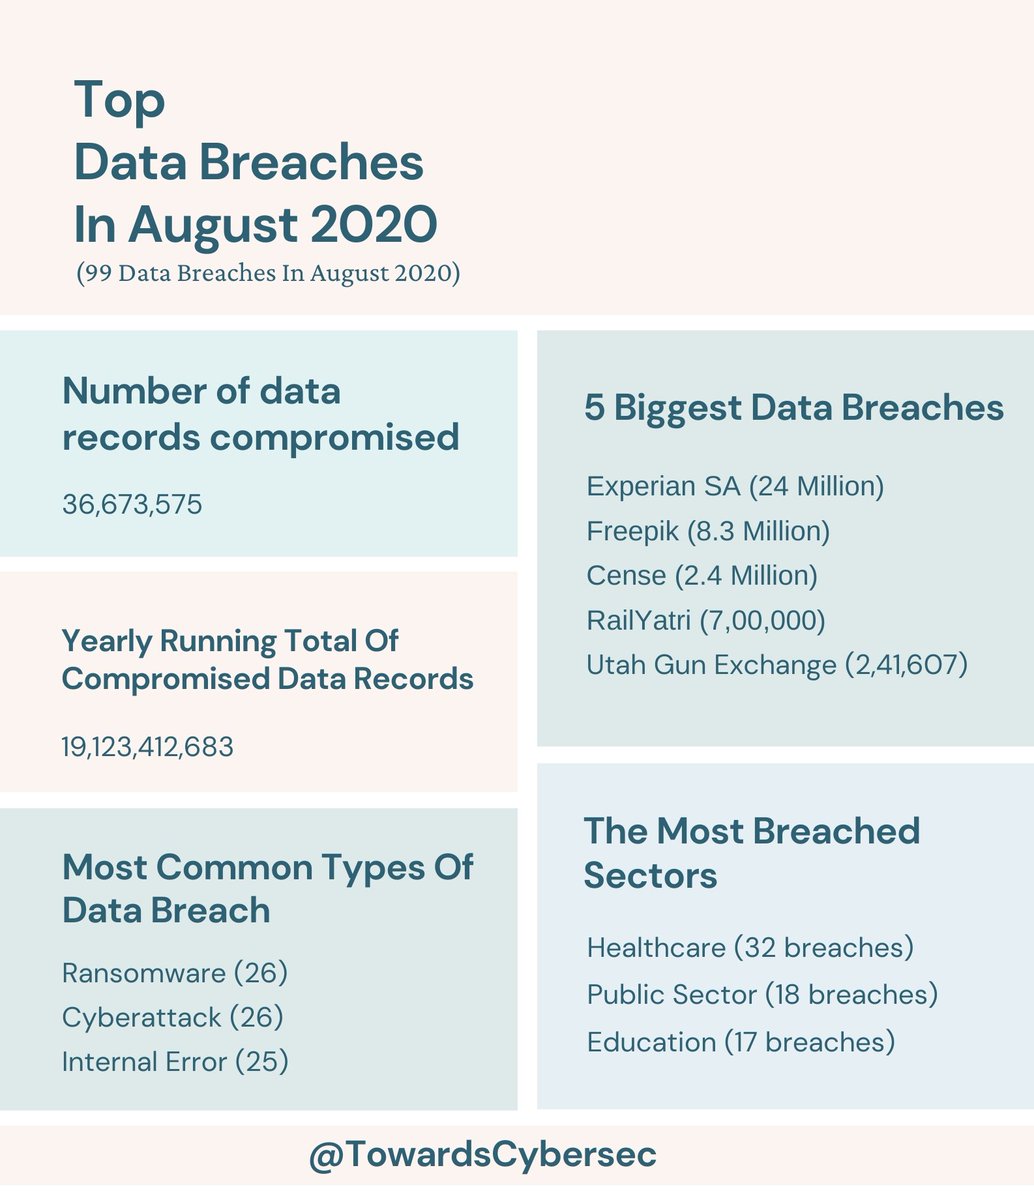 Top Data Breaches In August 2020 — Monthly Report 🗒️

BE AWARE👀... BE SECURE🔐

Follow For More >> @TowardsCybersec 

#cybersecurity #security #privacy #infosec #Report #monthlyreport #newsletter #cybernews #cyberattacks #databreach #Digital #tech #technology #innovation